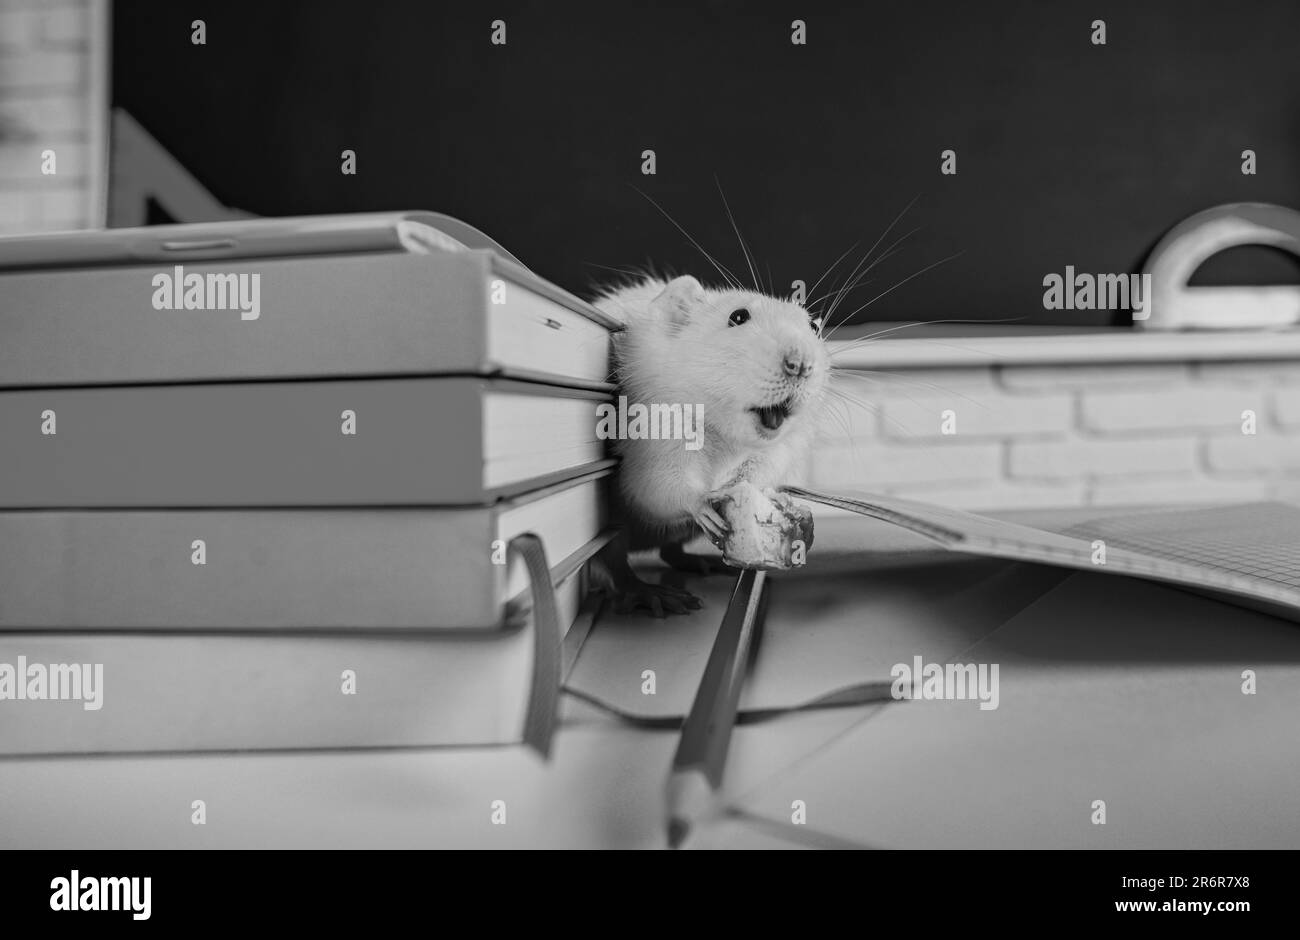 Education concept - rat sitting on books in the class, auditorium over chalkboard background. Stock Photo